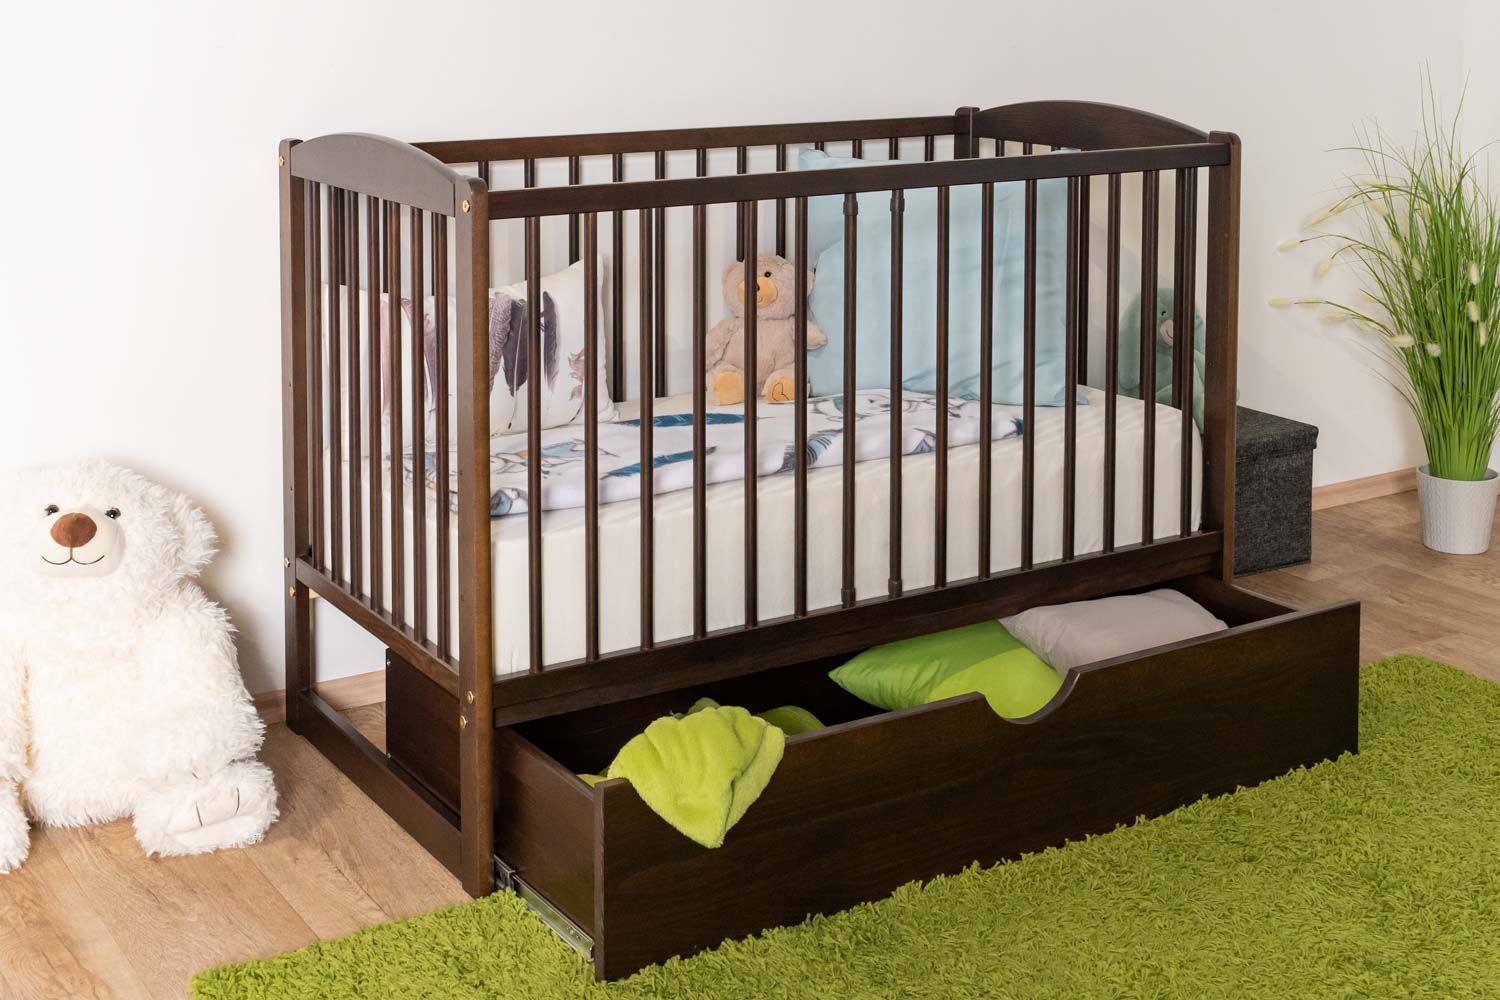 Simple crib / crib solid pine walnut 102, 60 x 120 cm, incl. slatted frame, incl. drawer, with three height-adjustable steps